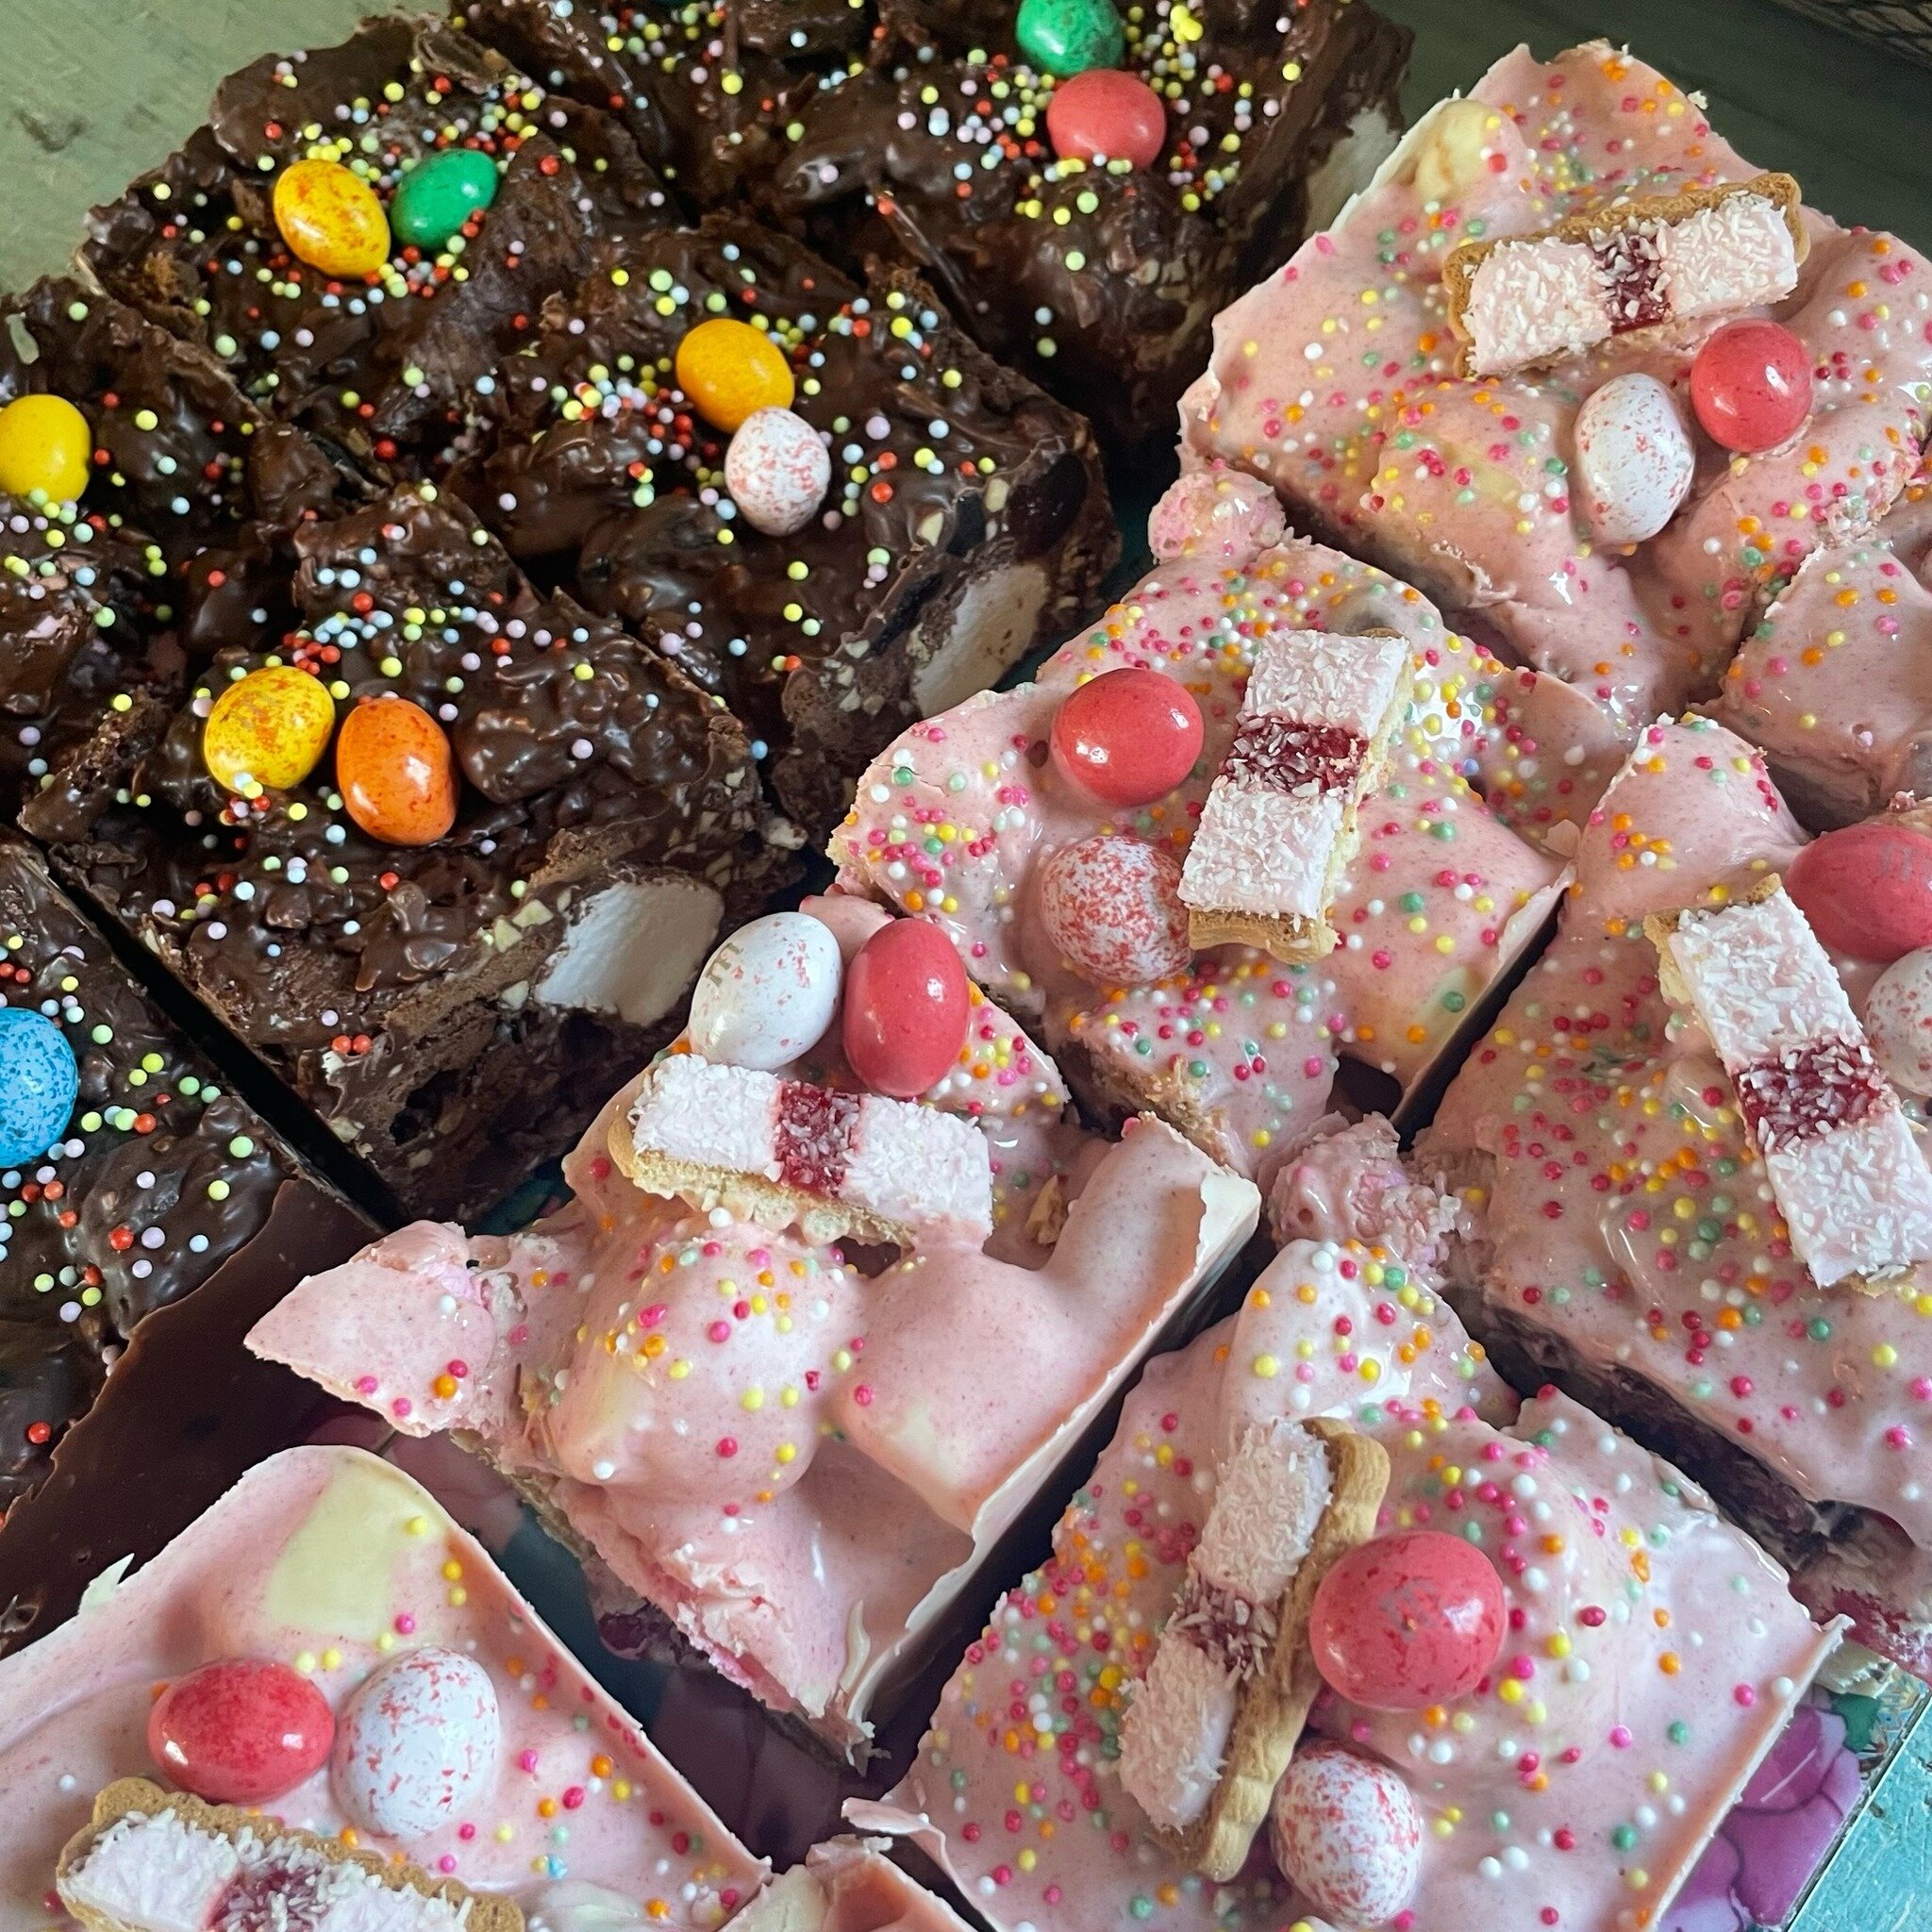 Easter rocky road today 😍😍😍 #happyeaster #floraontenth